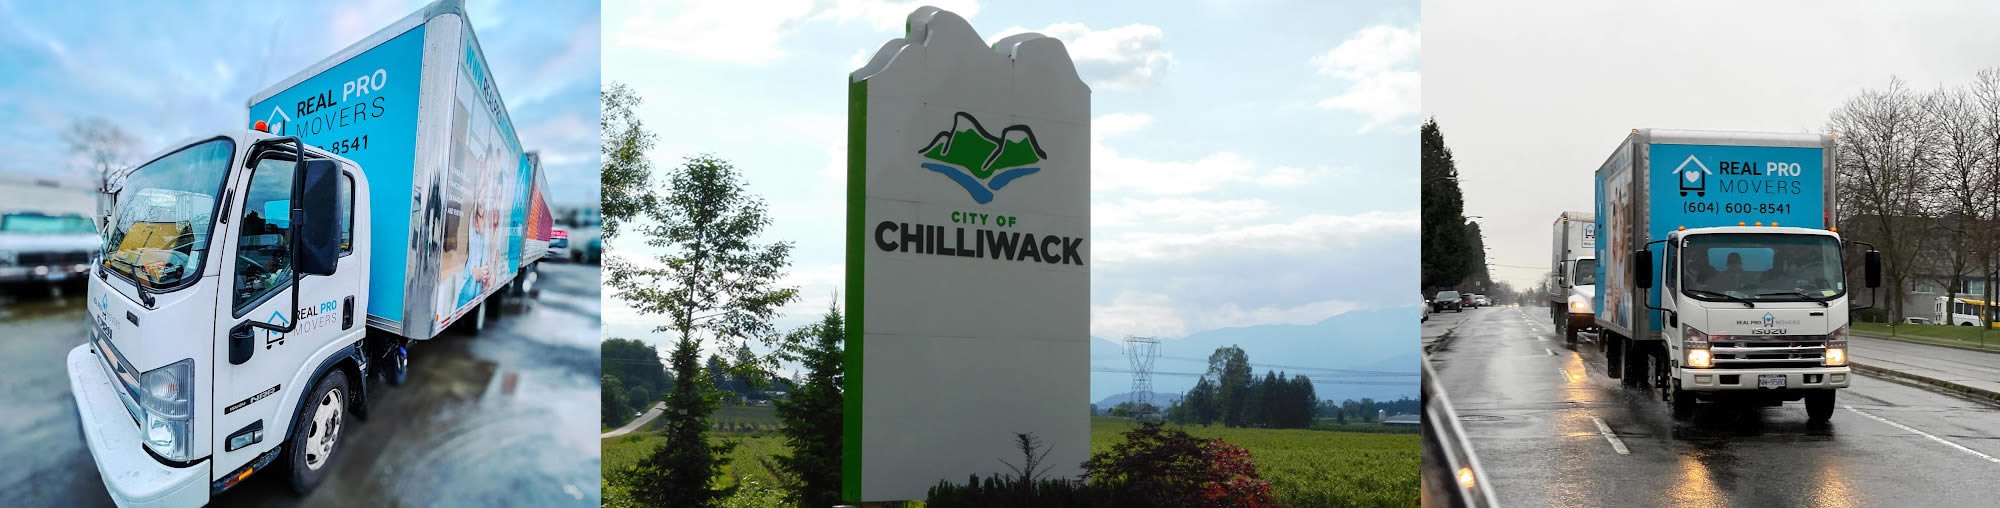 real-pro-movers-chilliwack-moving-company-